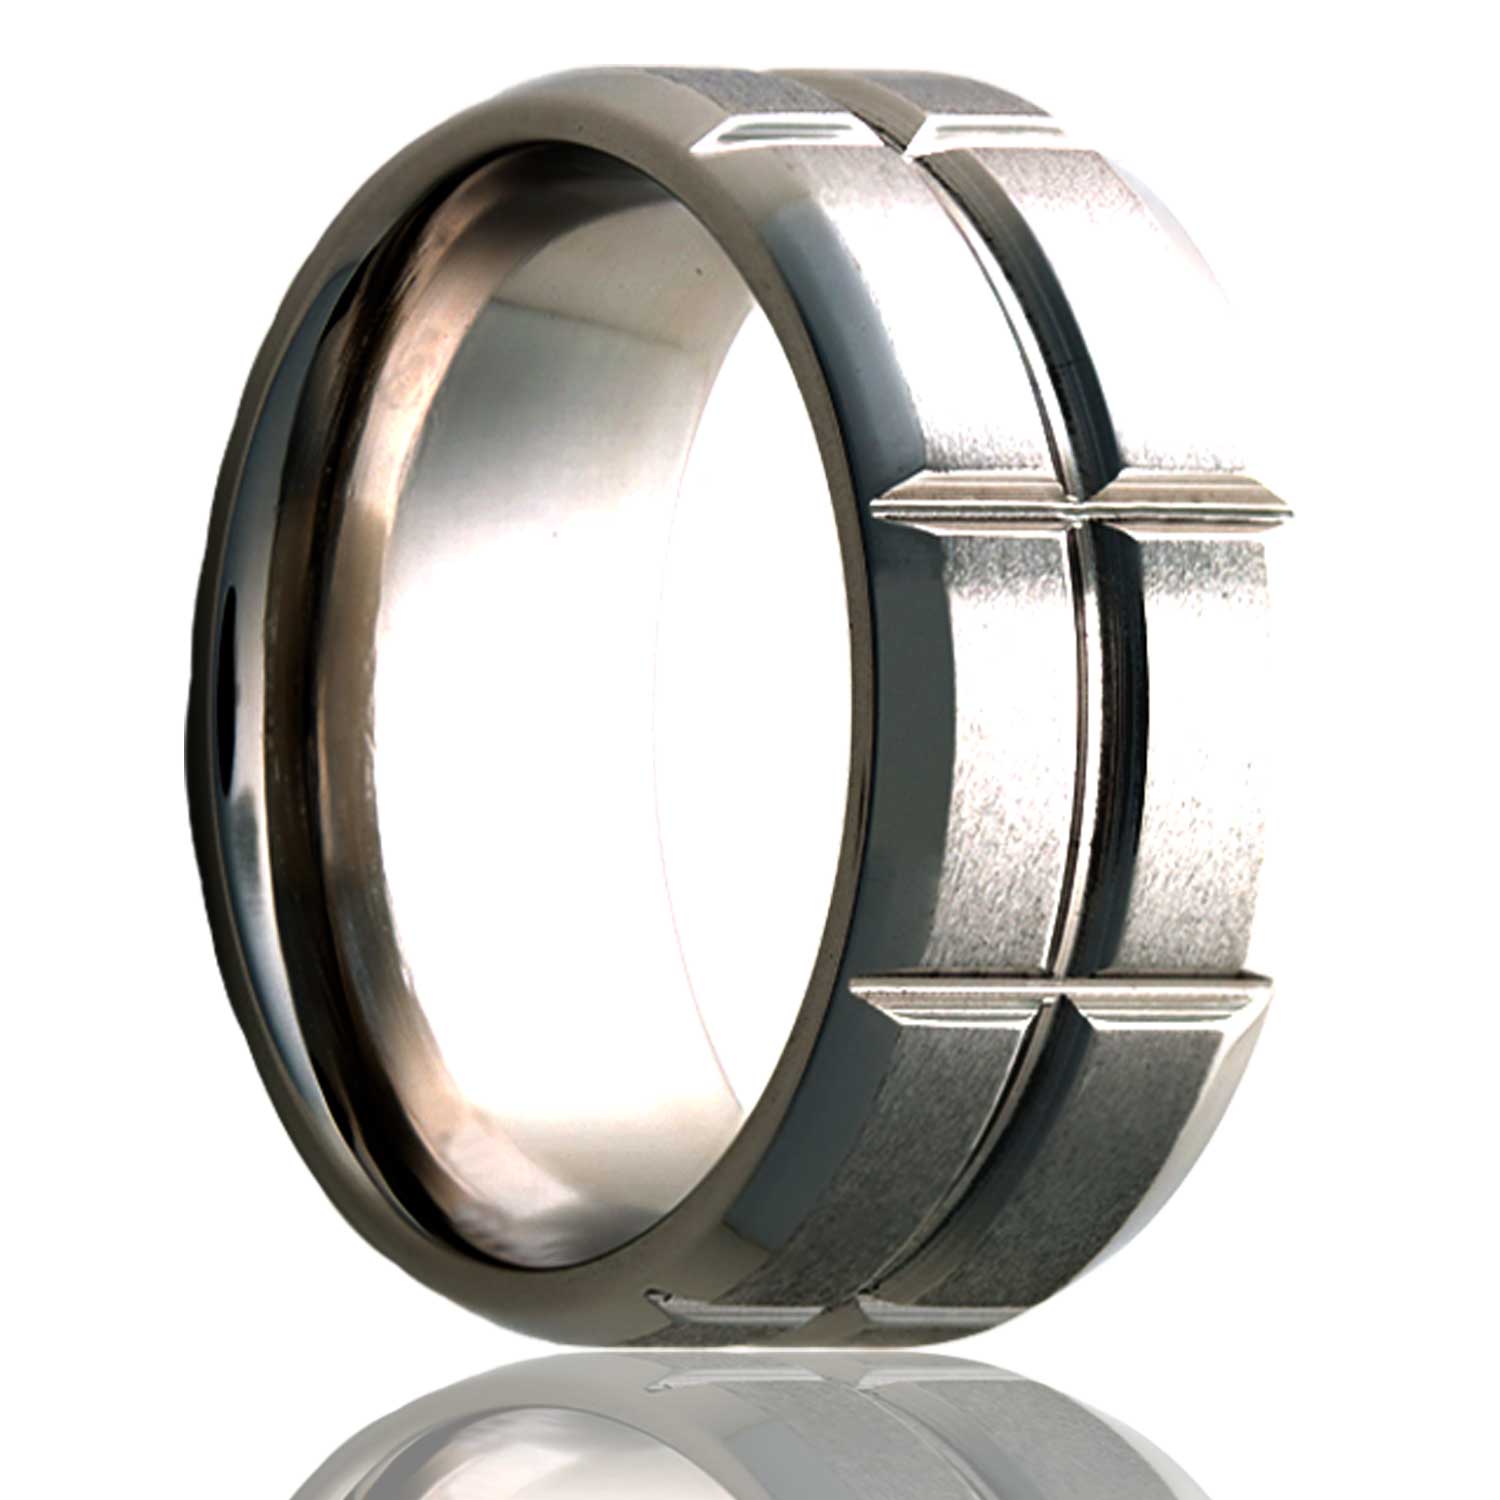 A satin finish cobalt wedding band with beveled edges and polished stripe displayed on a neutral white background.